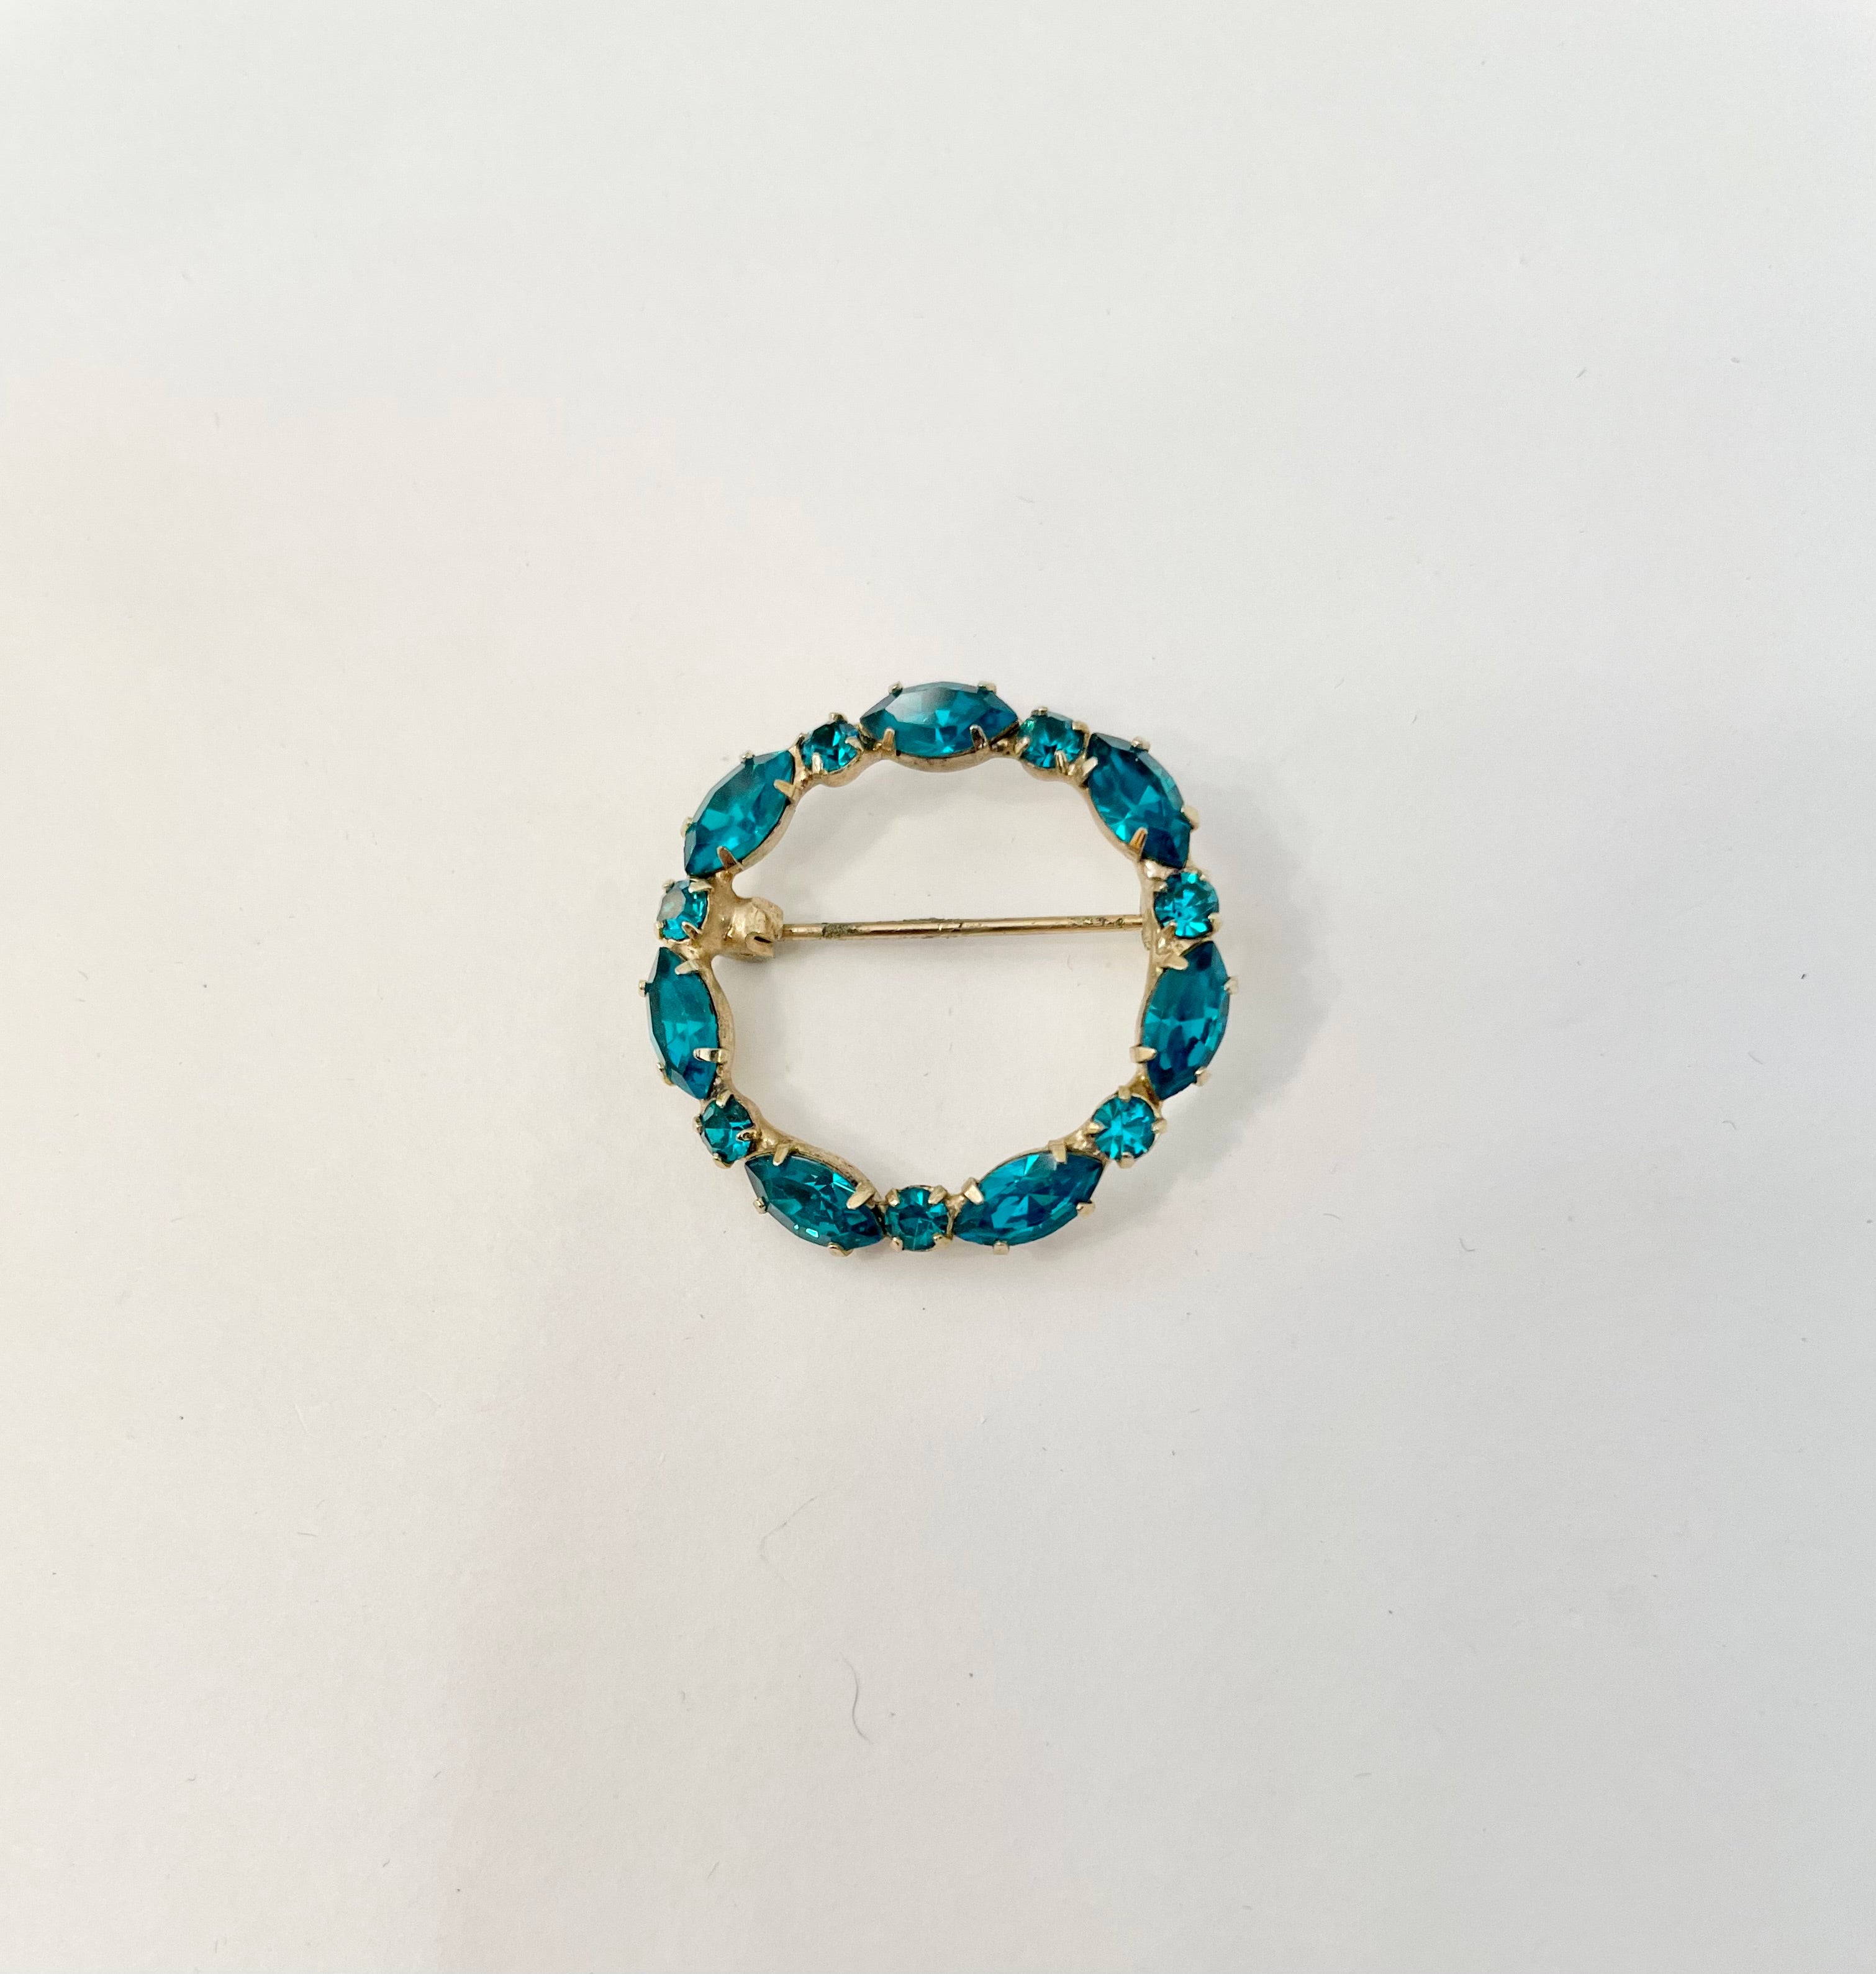 1930's stunning, petite circle glass brooch... such a lovely estate piece.